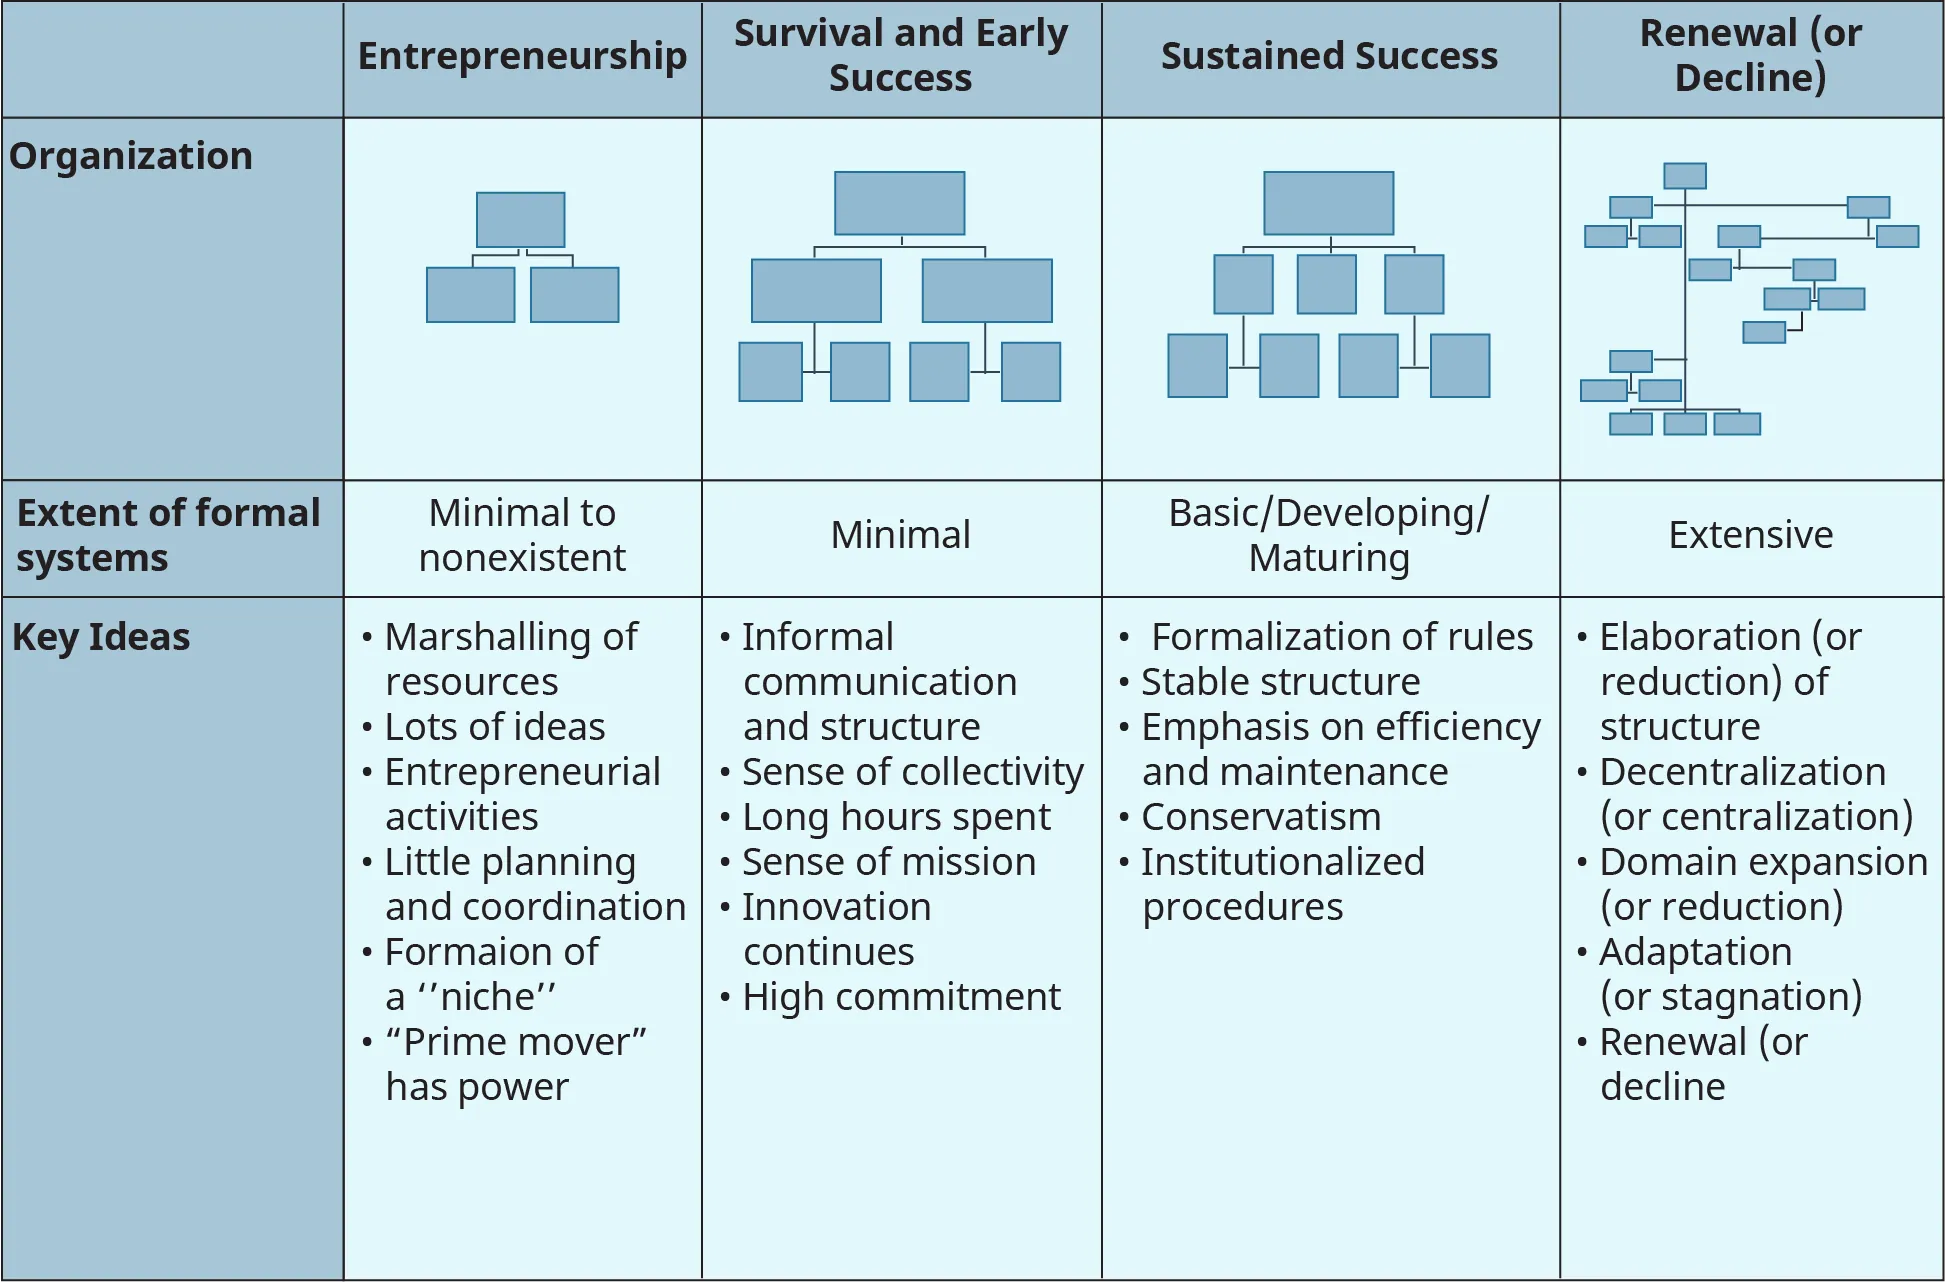 A two-way table shows the patterns and structures that appear in an organization through four phases.